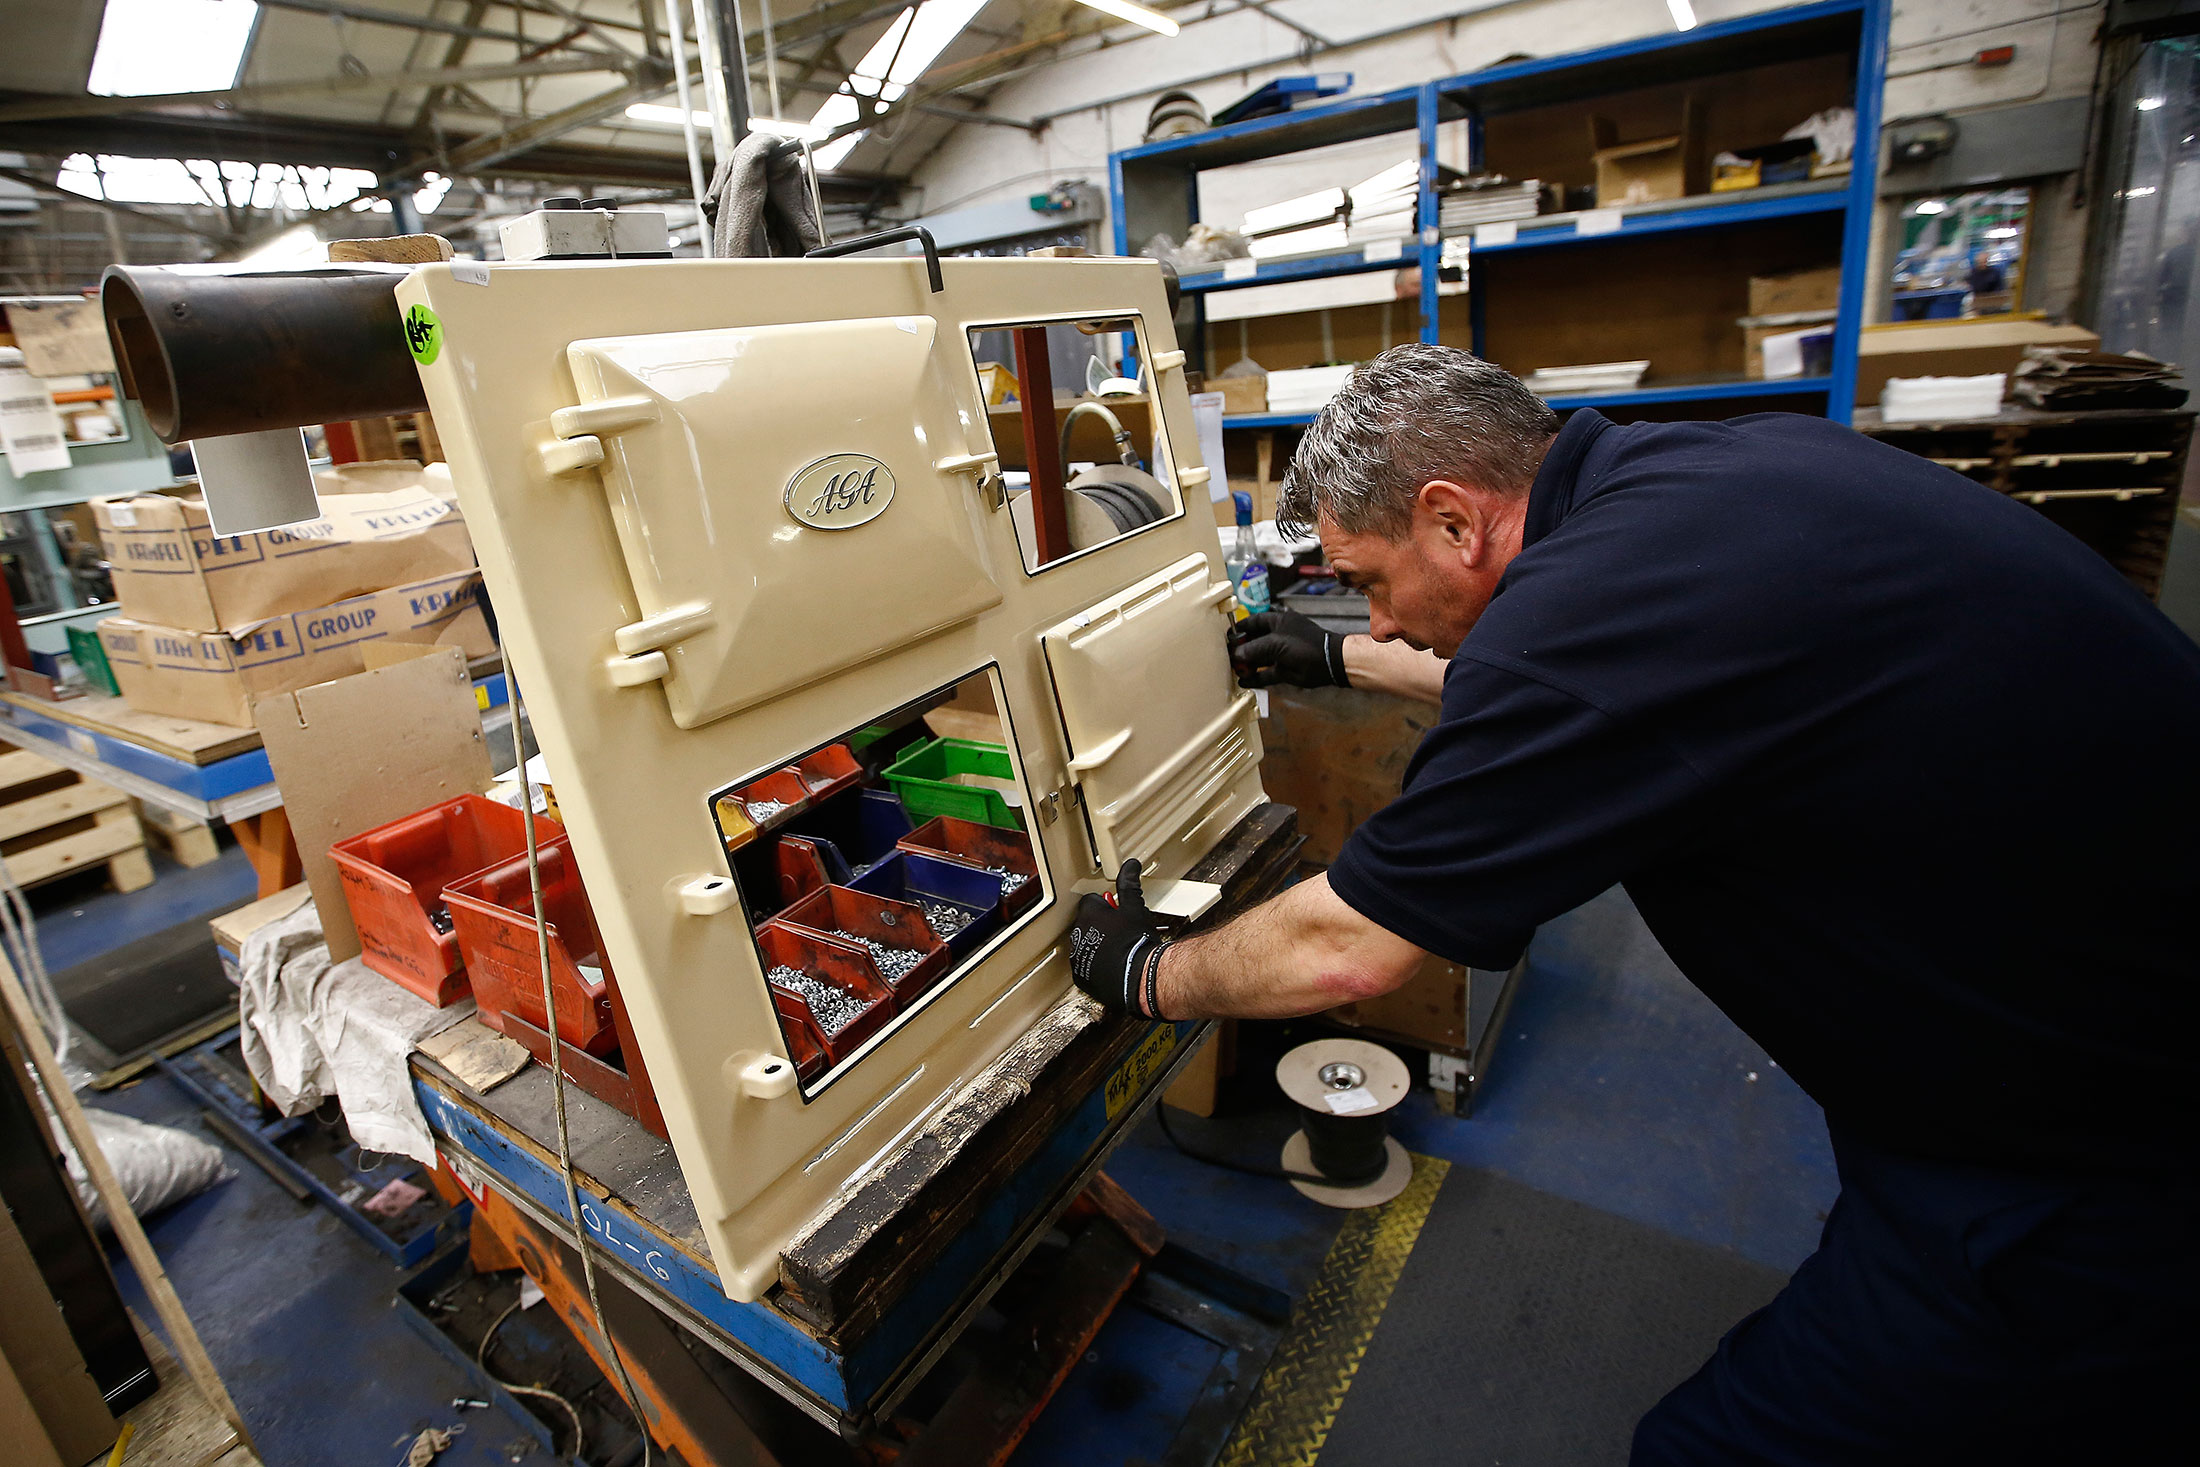 An employee fits a door to an AGA 3-Oven Classic range cooker at the company's plant in Telford, U.K.
